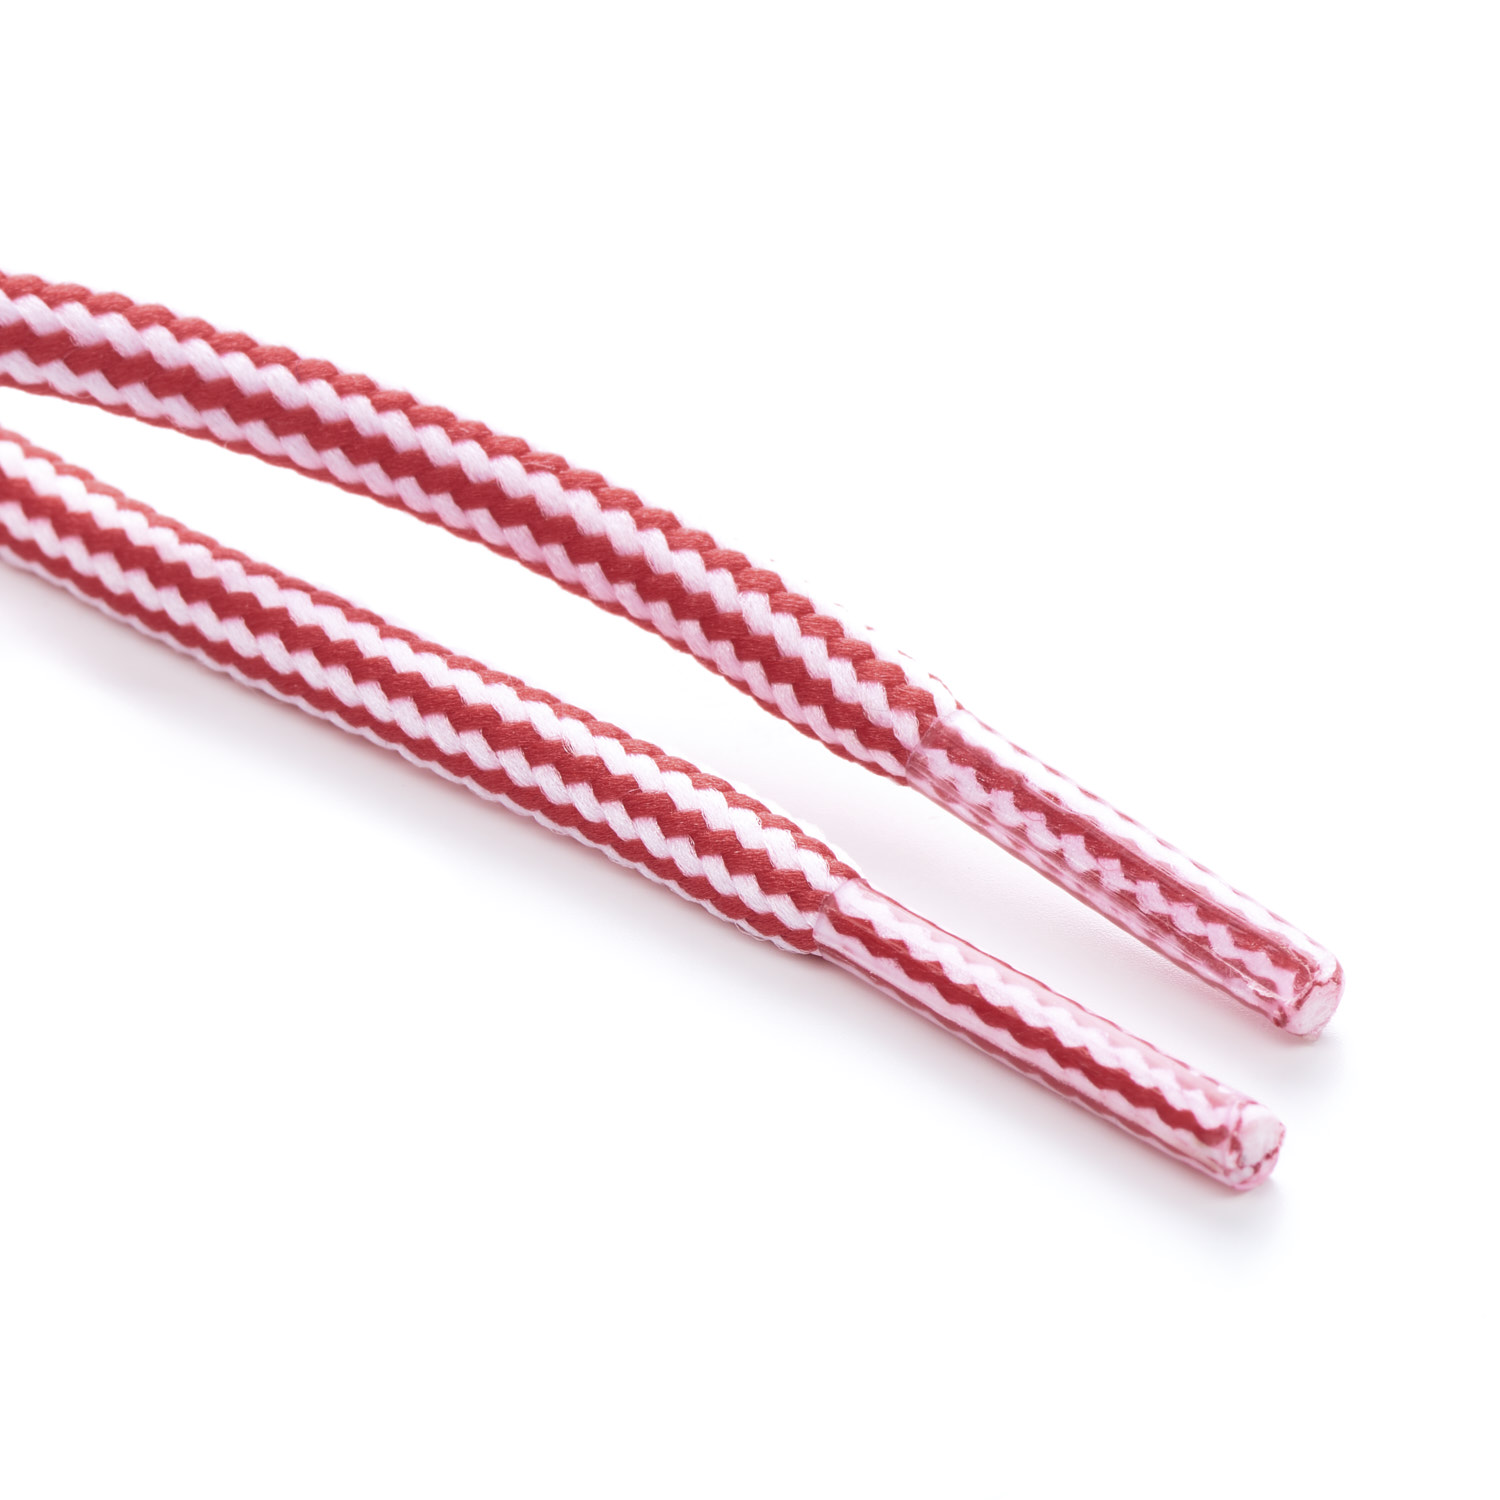 5mm Round Cord Stripe Shoe Laces Rosemadder Red & Optic White